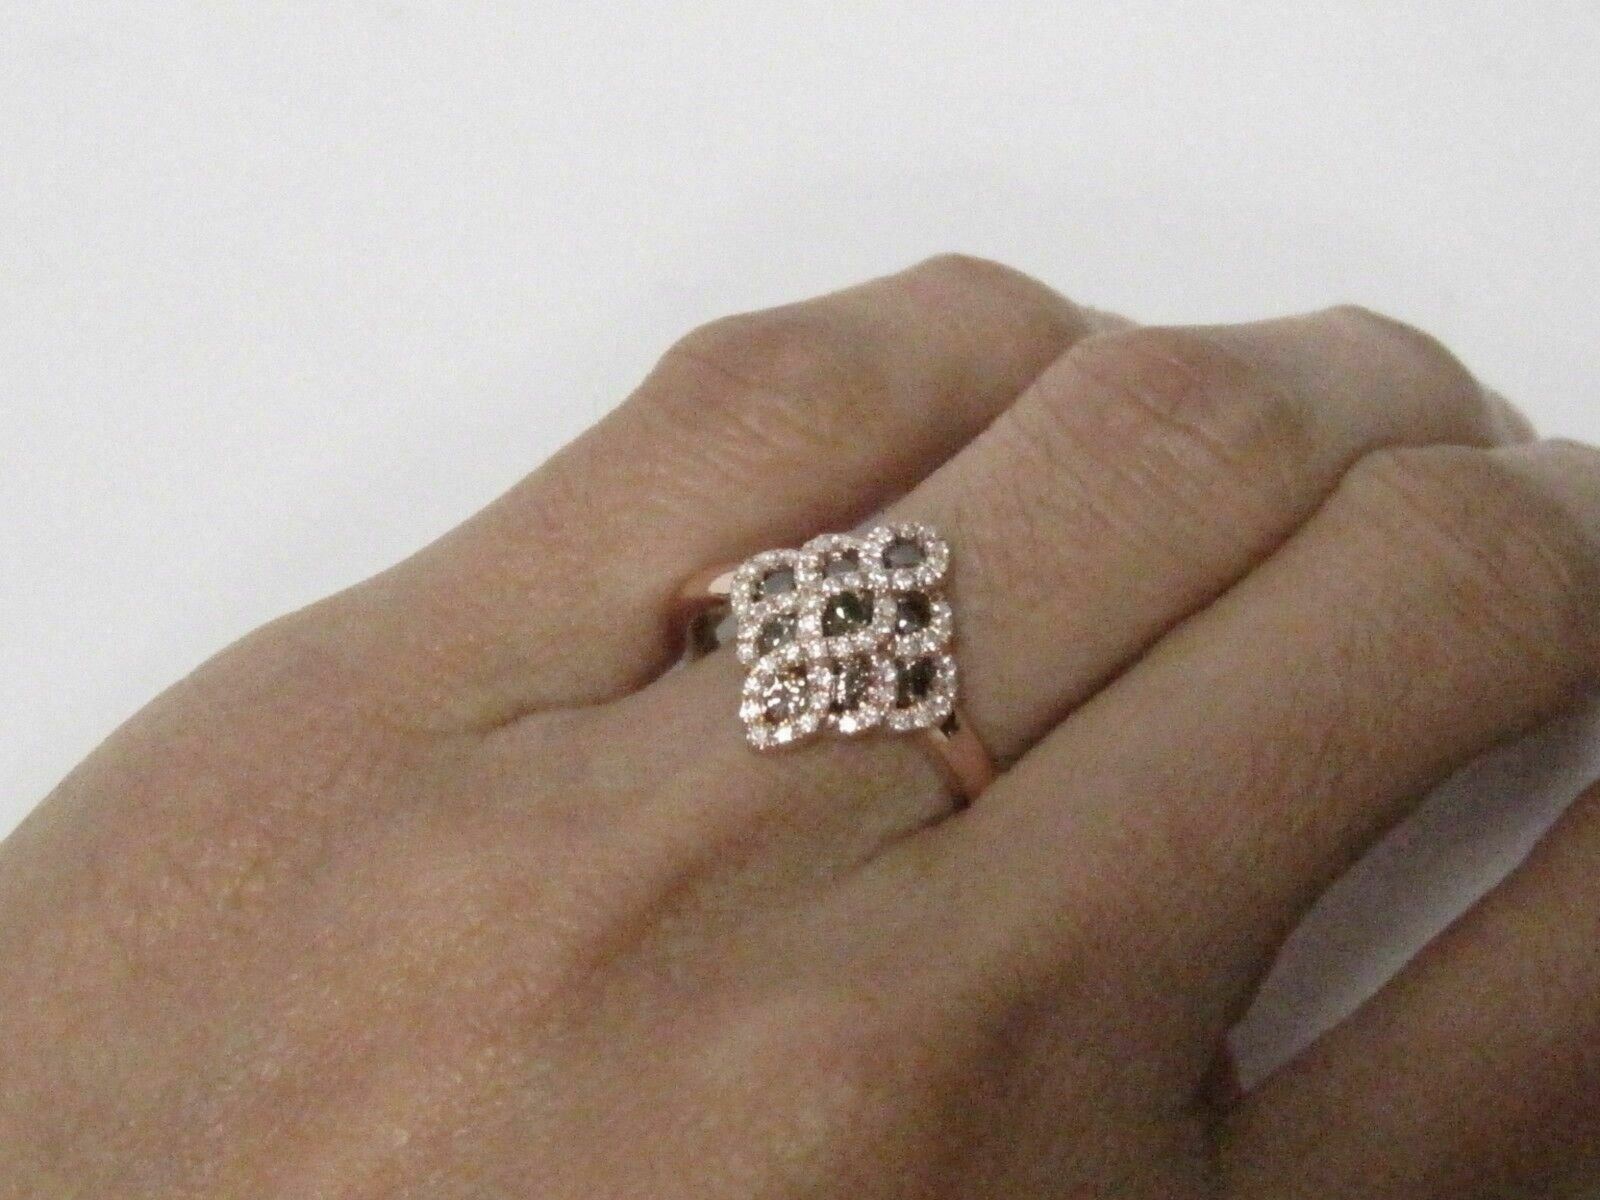 .72 TCW Natural Champagne Diamond Cocktail Ring Size 6.5 14k Rose Gold